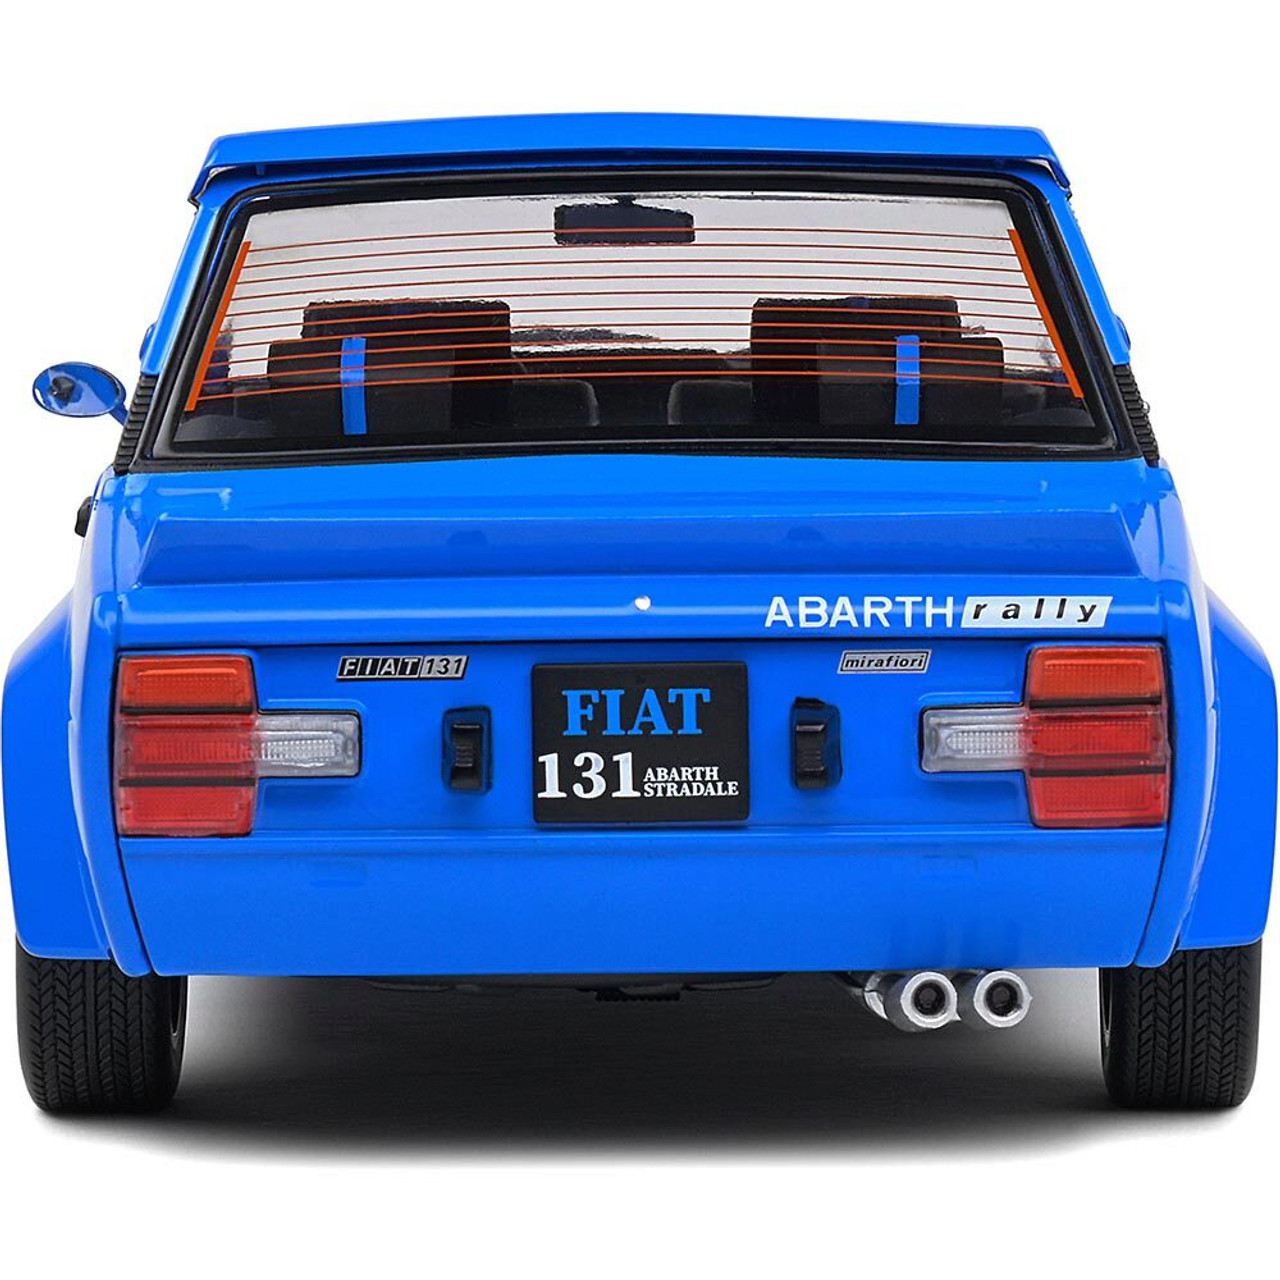 1980 Fiat 131 Abarth - Blue 1:18 Scale Diecast Model by Solido 